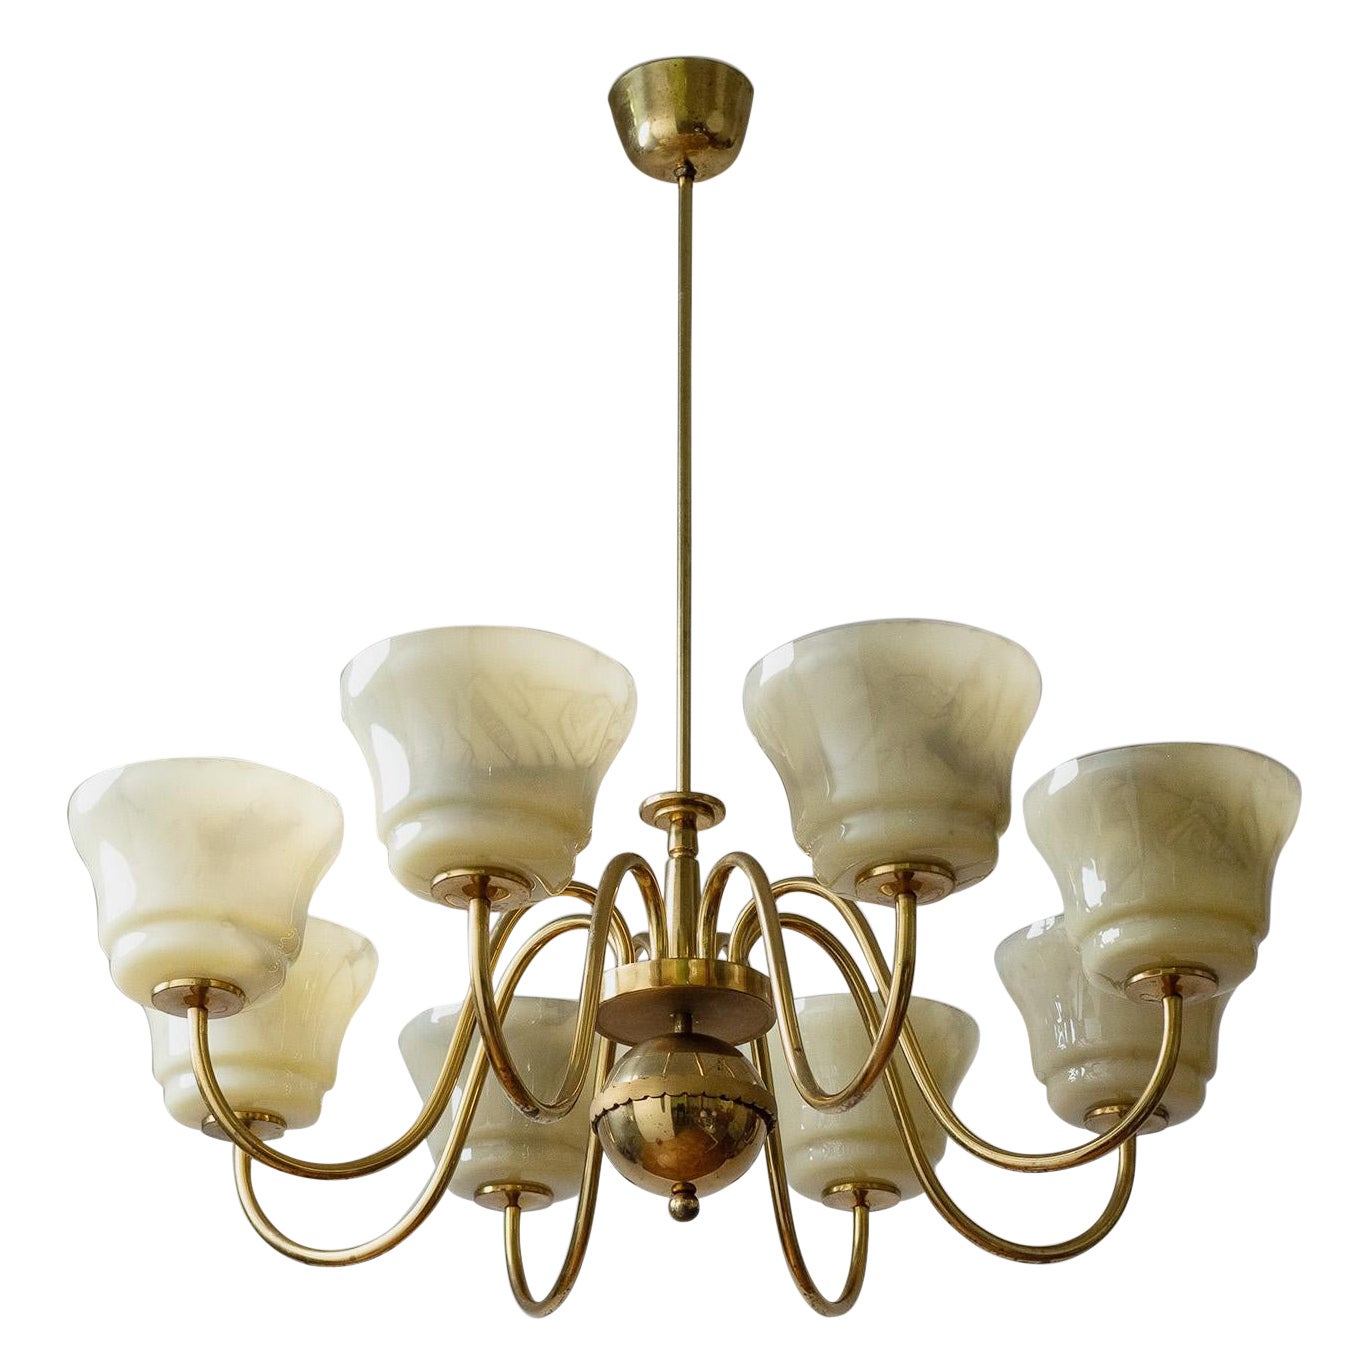 Large Brass Chandelier with Enameled Glass Shades, 1940s